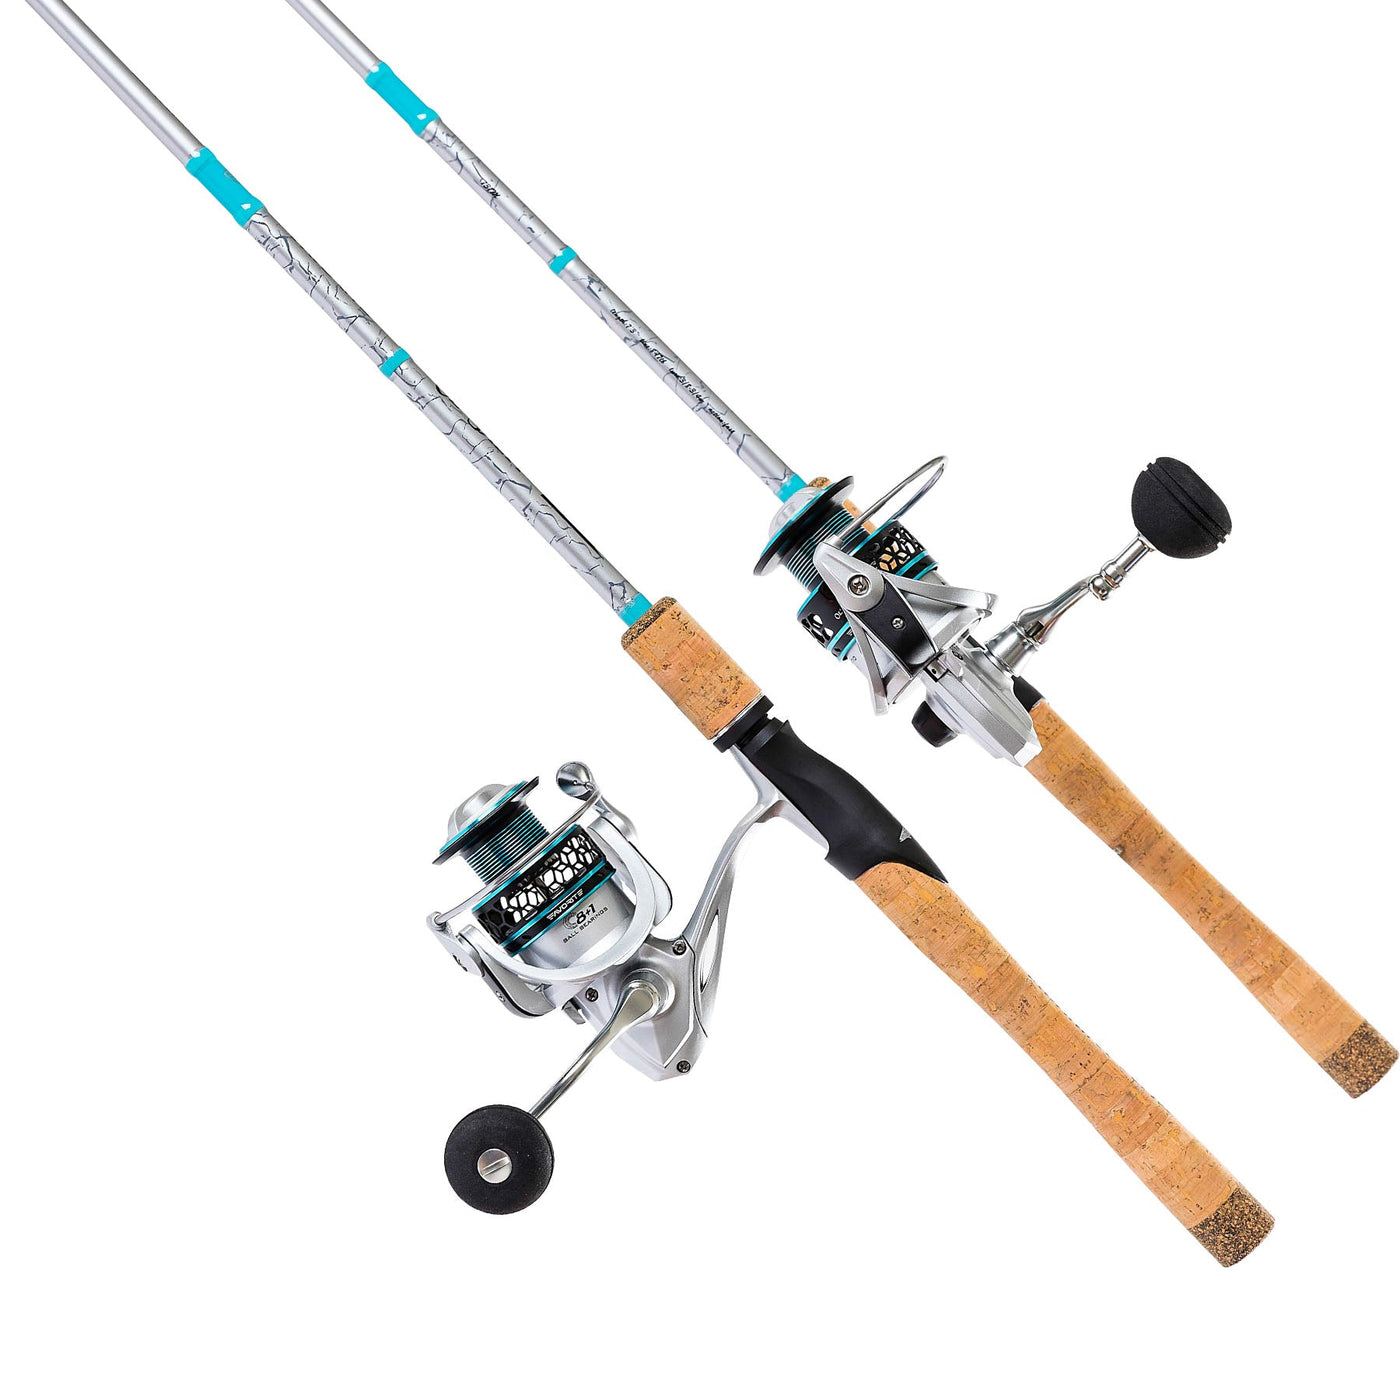 OL' Salty Spinning Combo